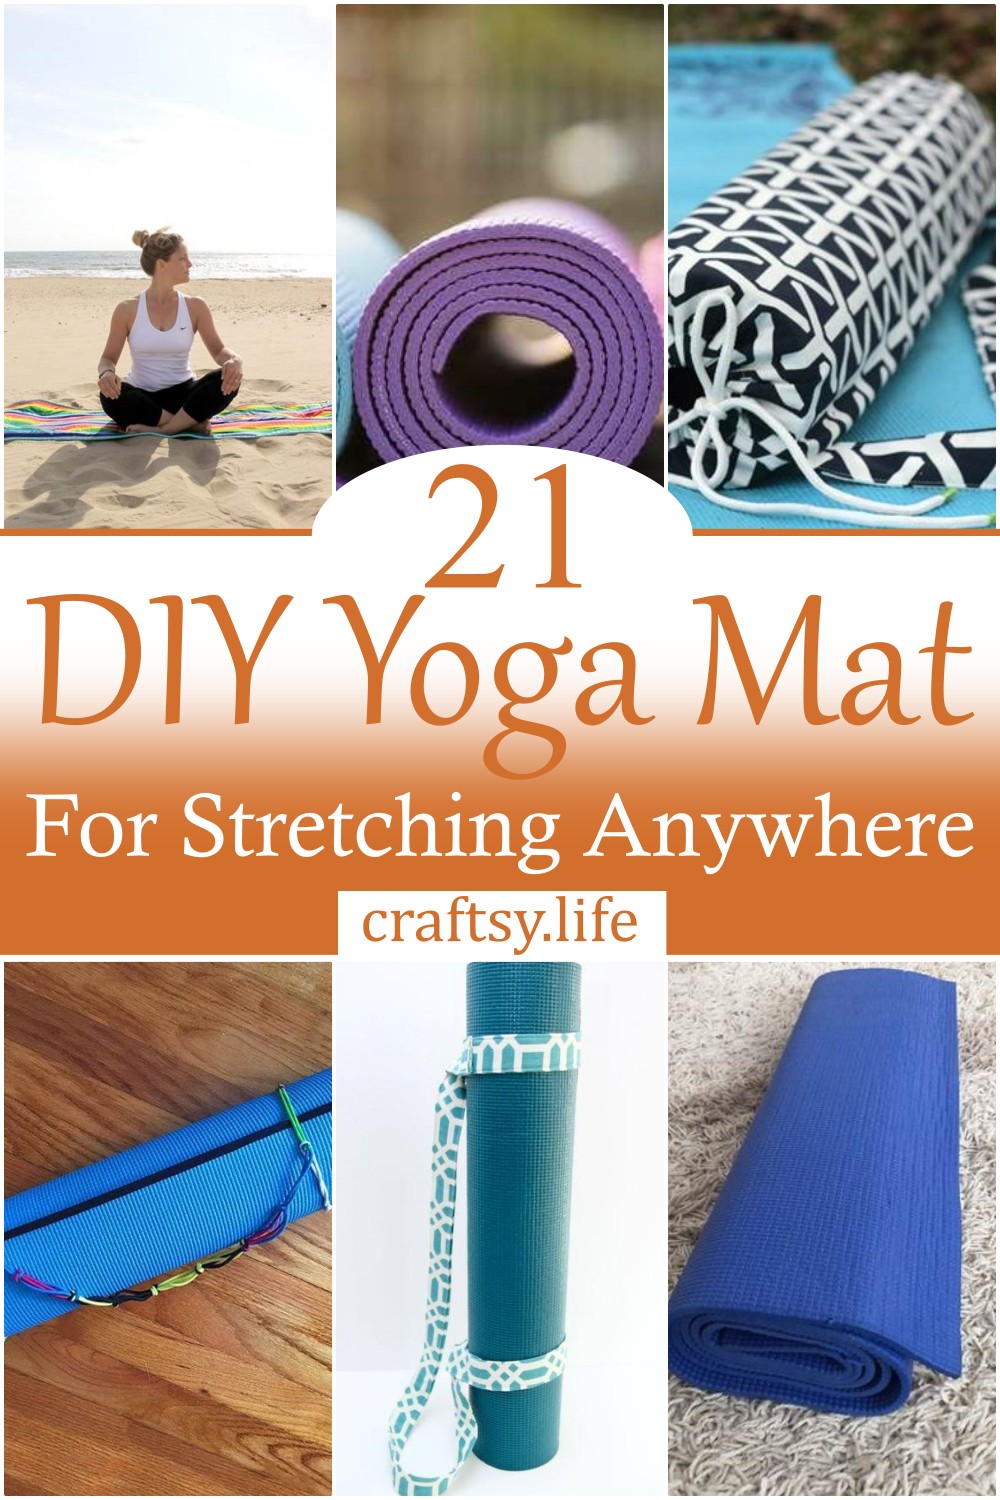 DIY Yoga Mat For Stretching Anywhere